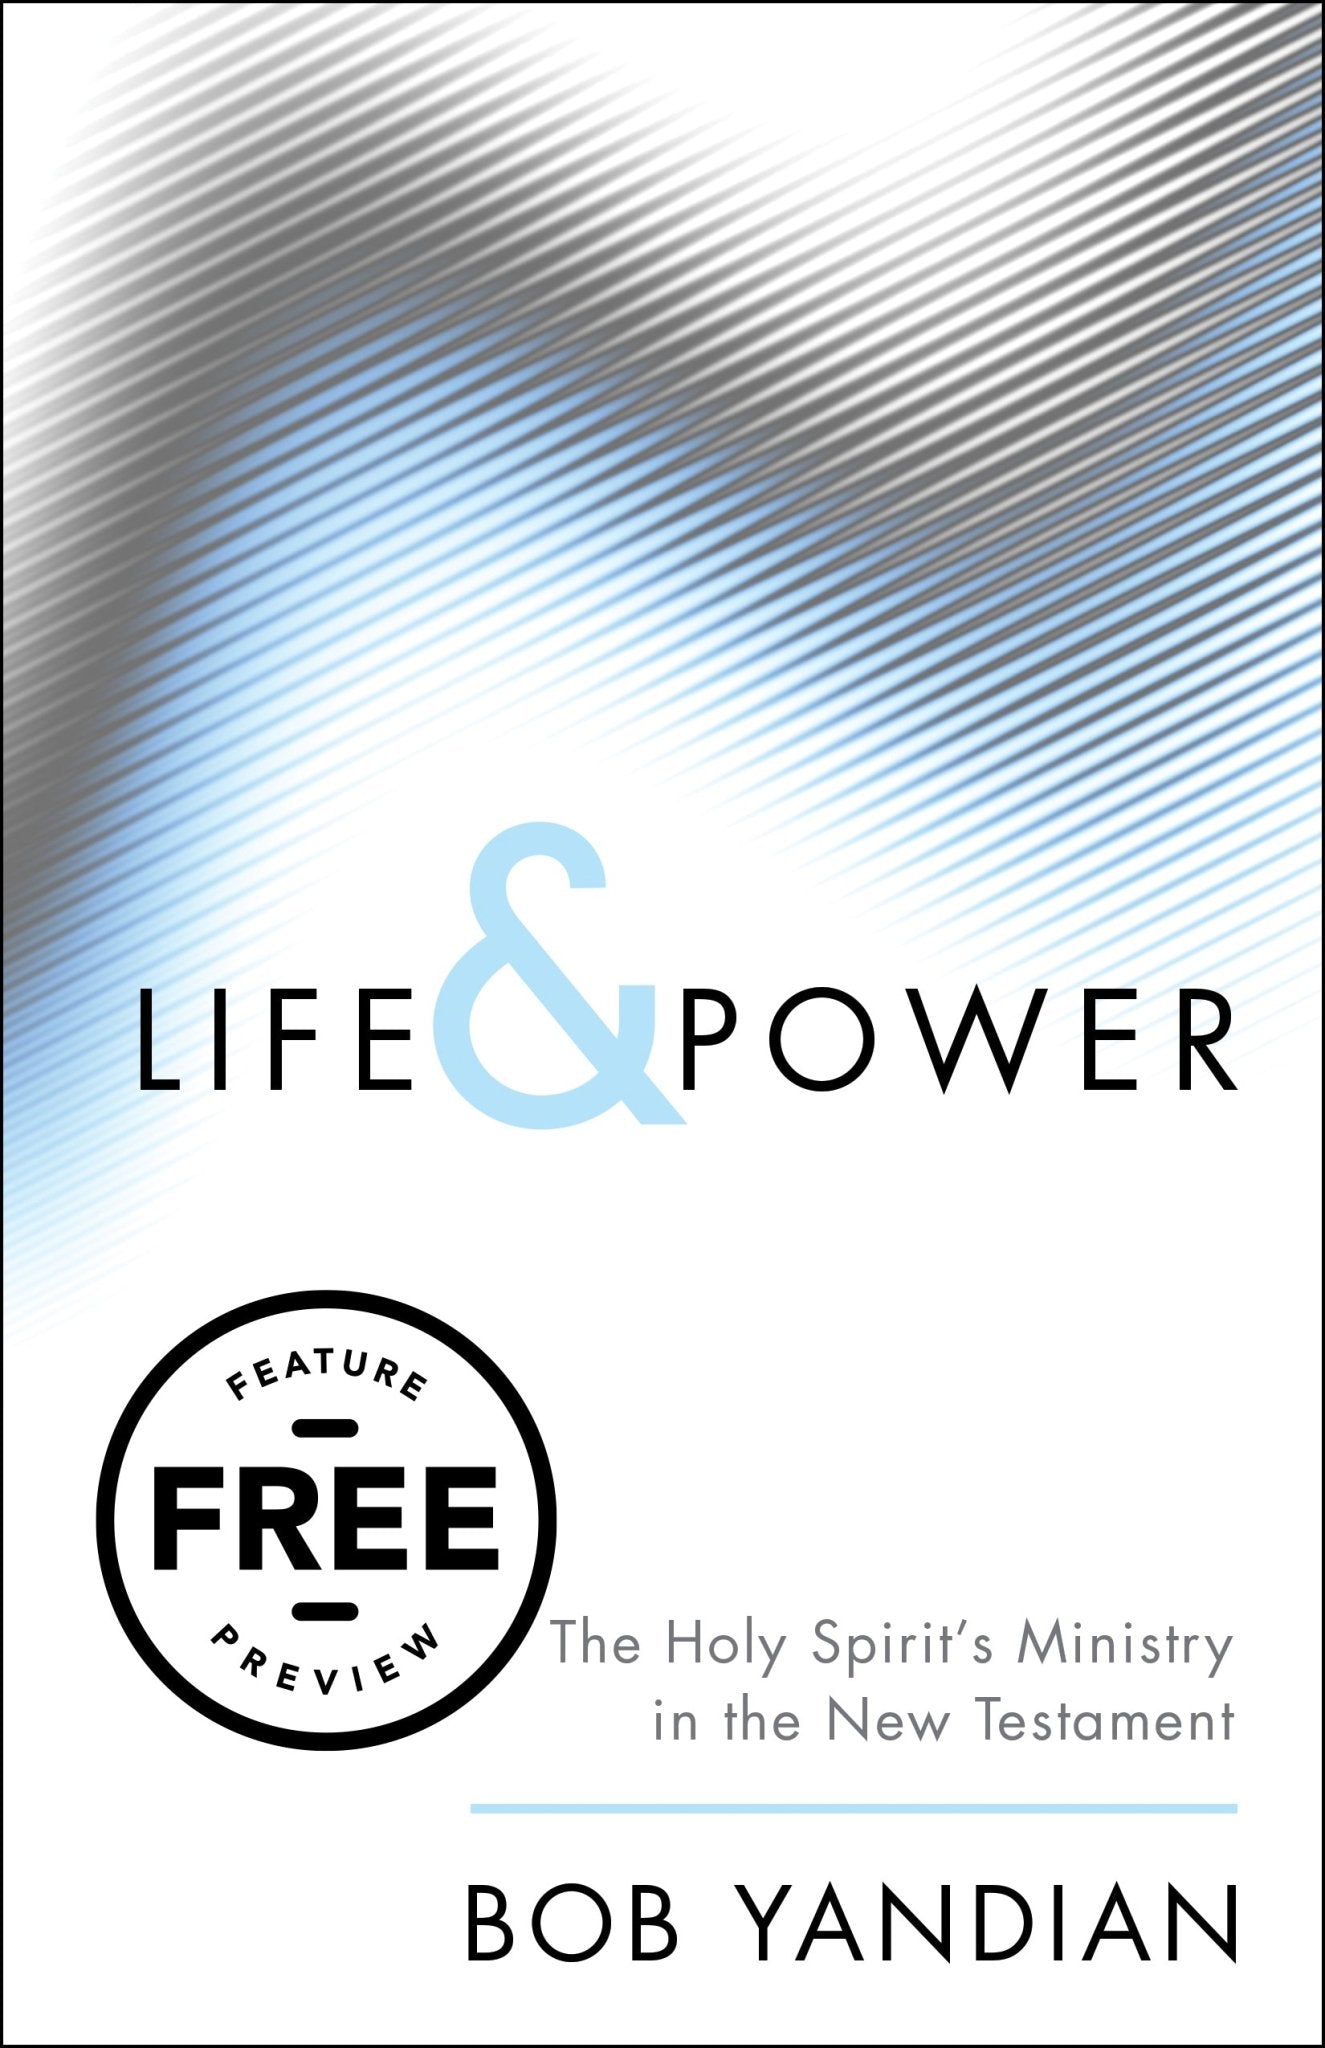 Life & Power Free Feature Message (PDF Download)